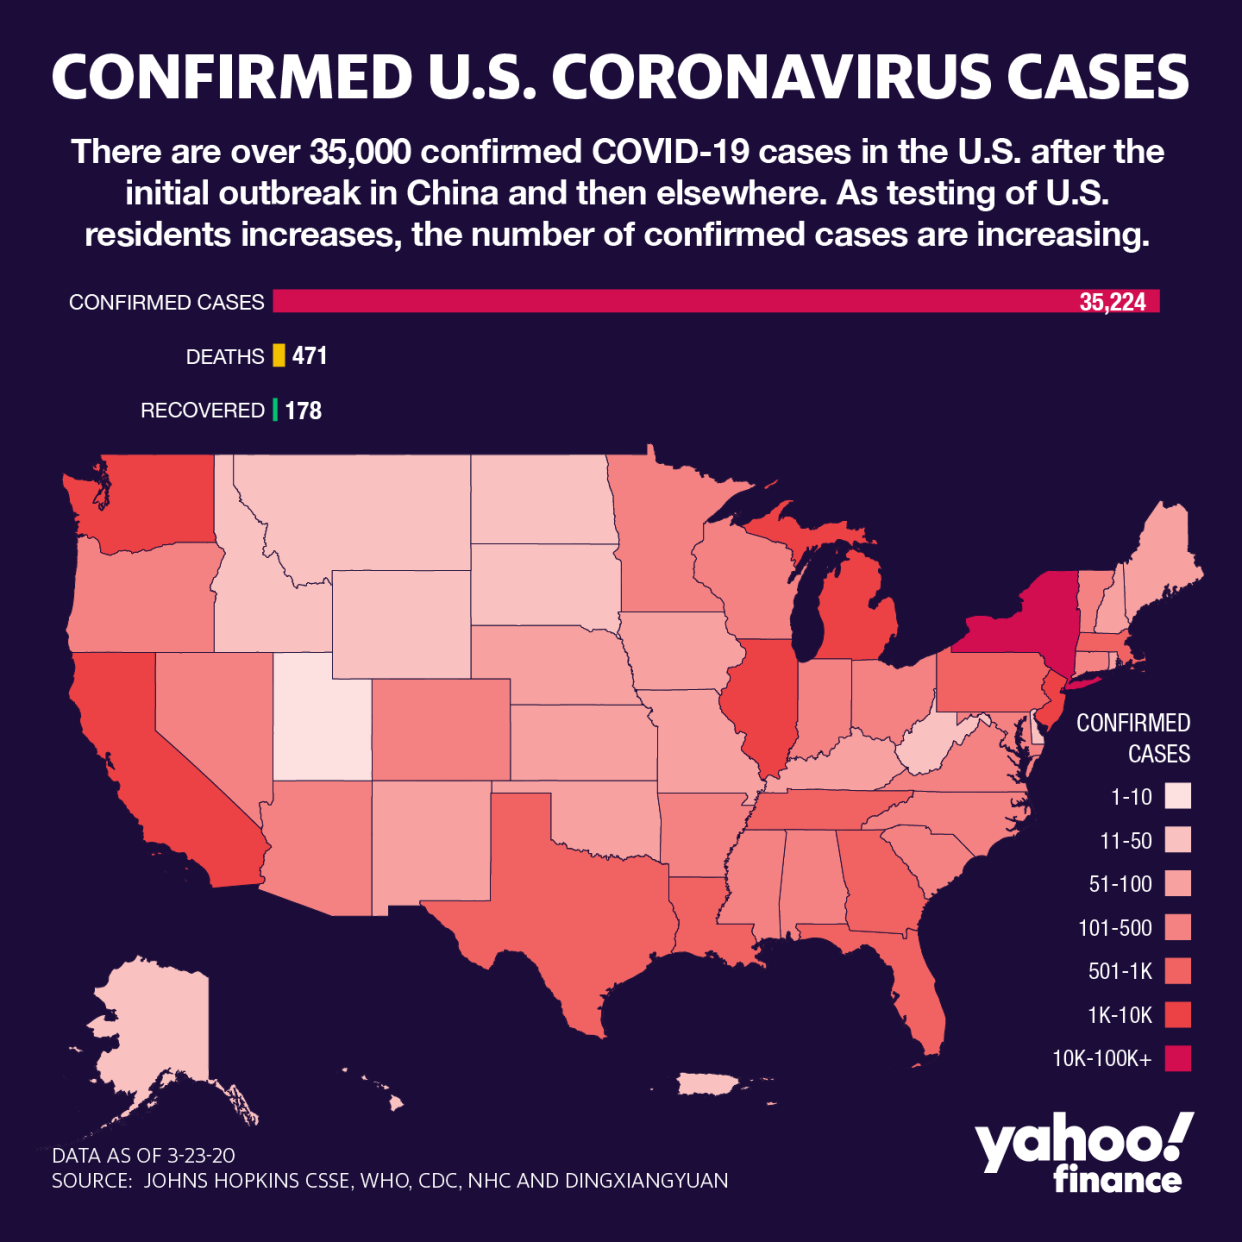 New York is the U.S.'s epicenter of confirmed COVID-19 cases, followed by California and Washington.